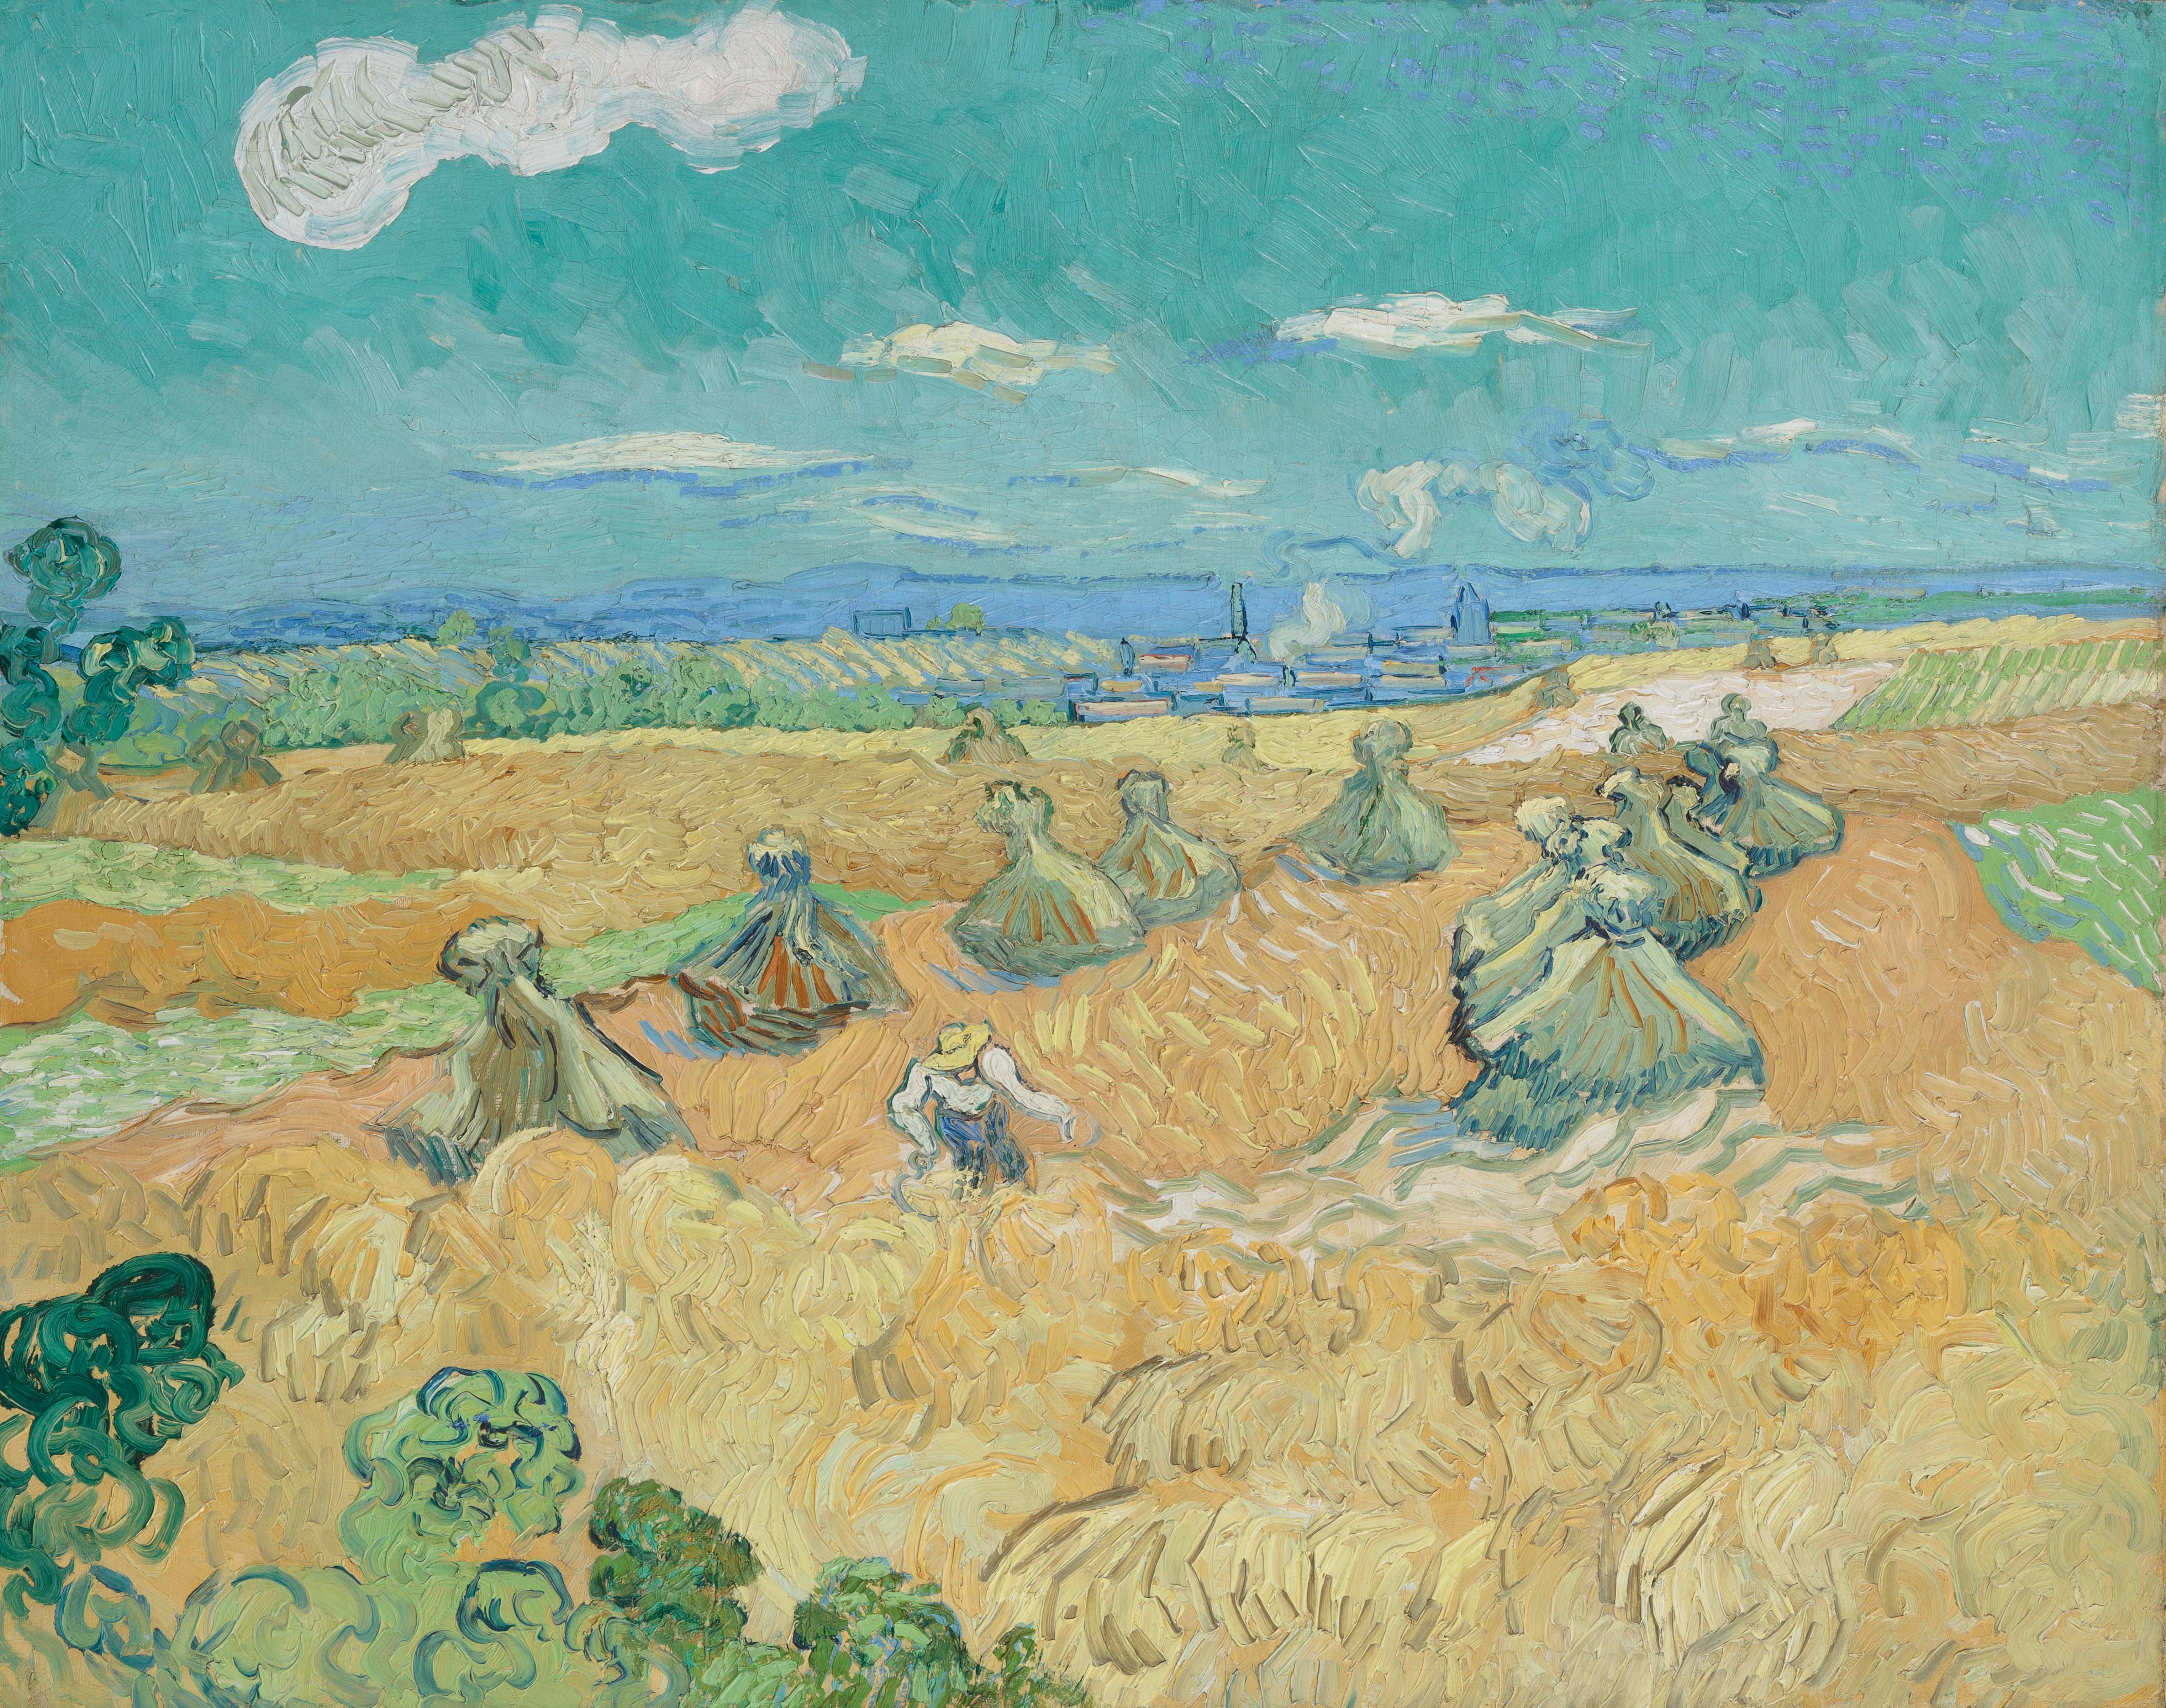 Vincent van Gogh (Dutch, 1853–1890). Wheat Fields with Reaper, Auvers, 1890. Oil on canvas; 29 x 36 5/8 in. (73.6 x 93 cm). Toledo Museum of Art, purchased with funds from the Libbey Endowment, gift of Edward Drummond Libbey, 1935.4.